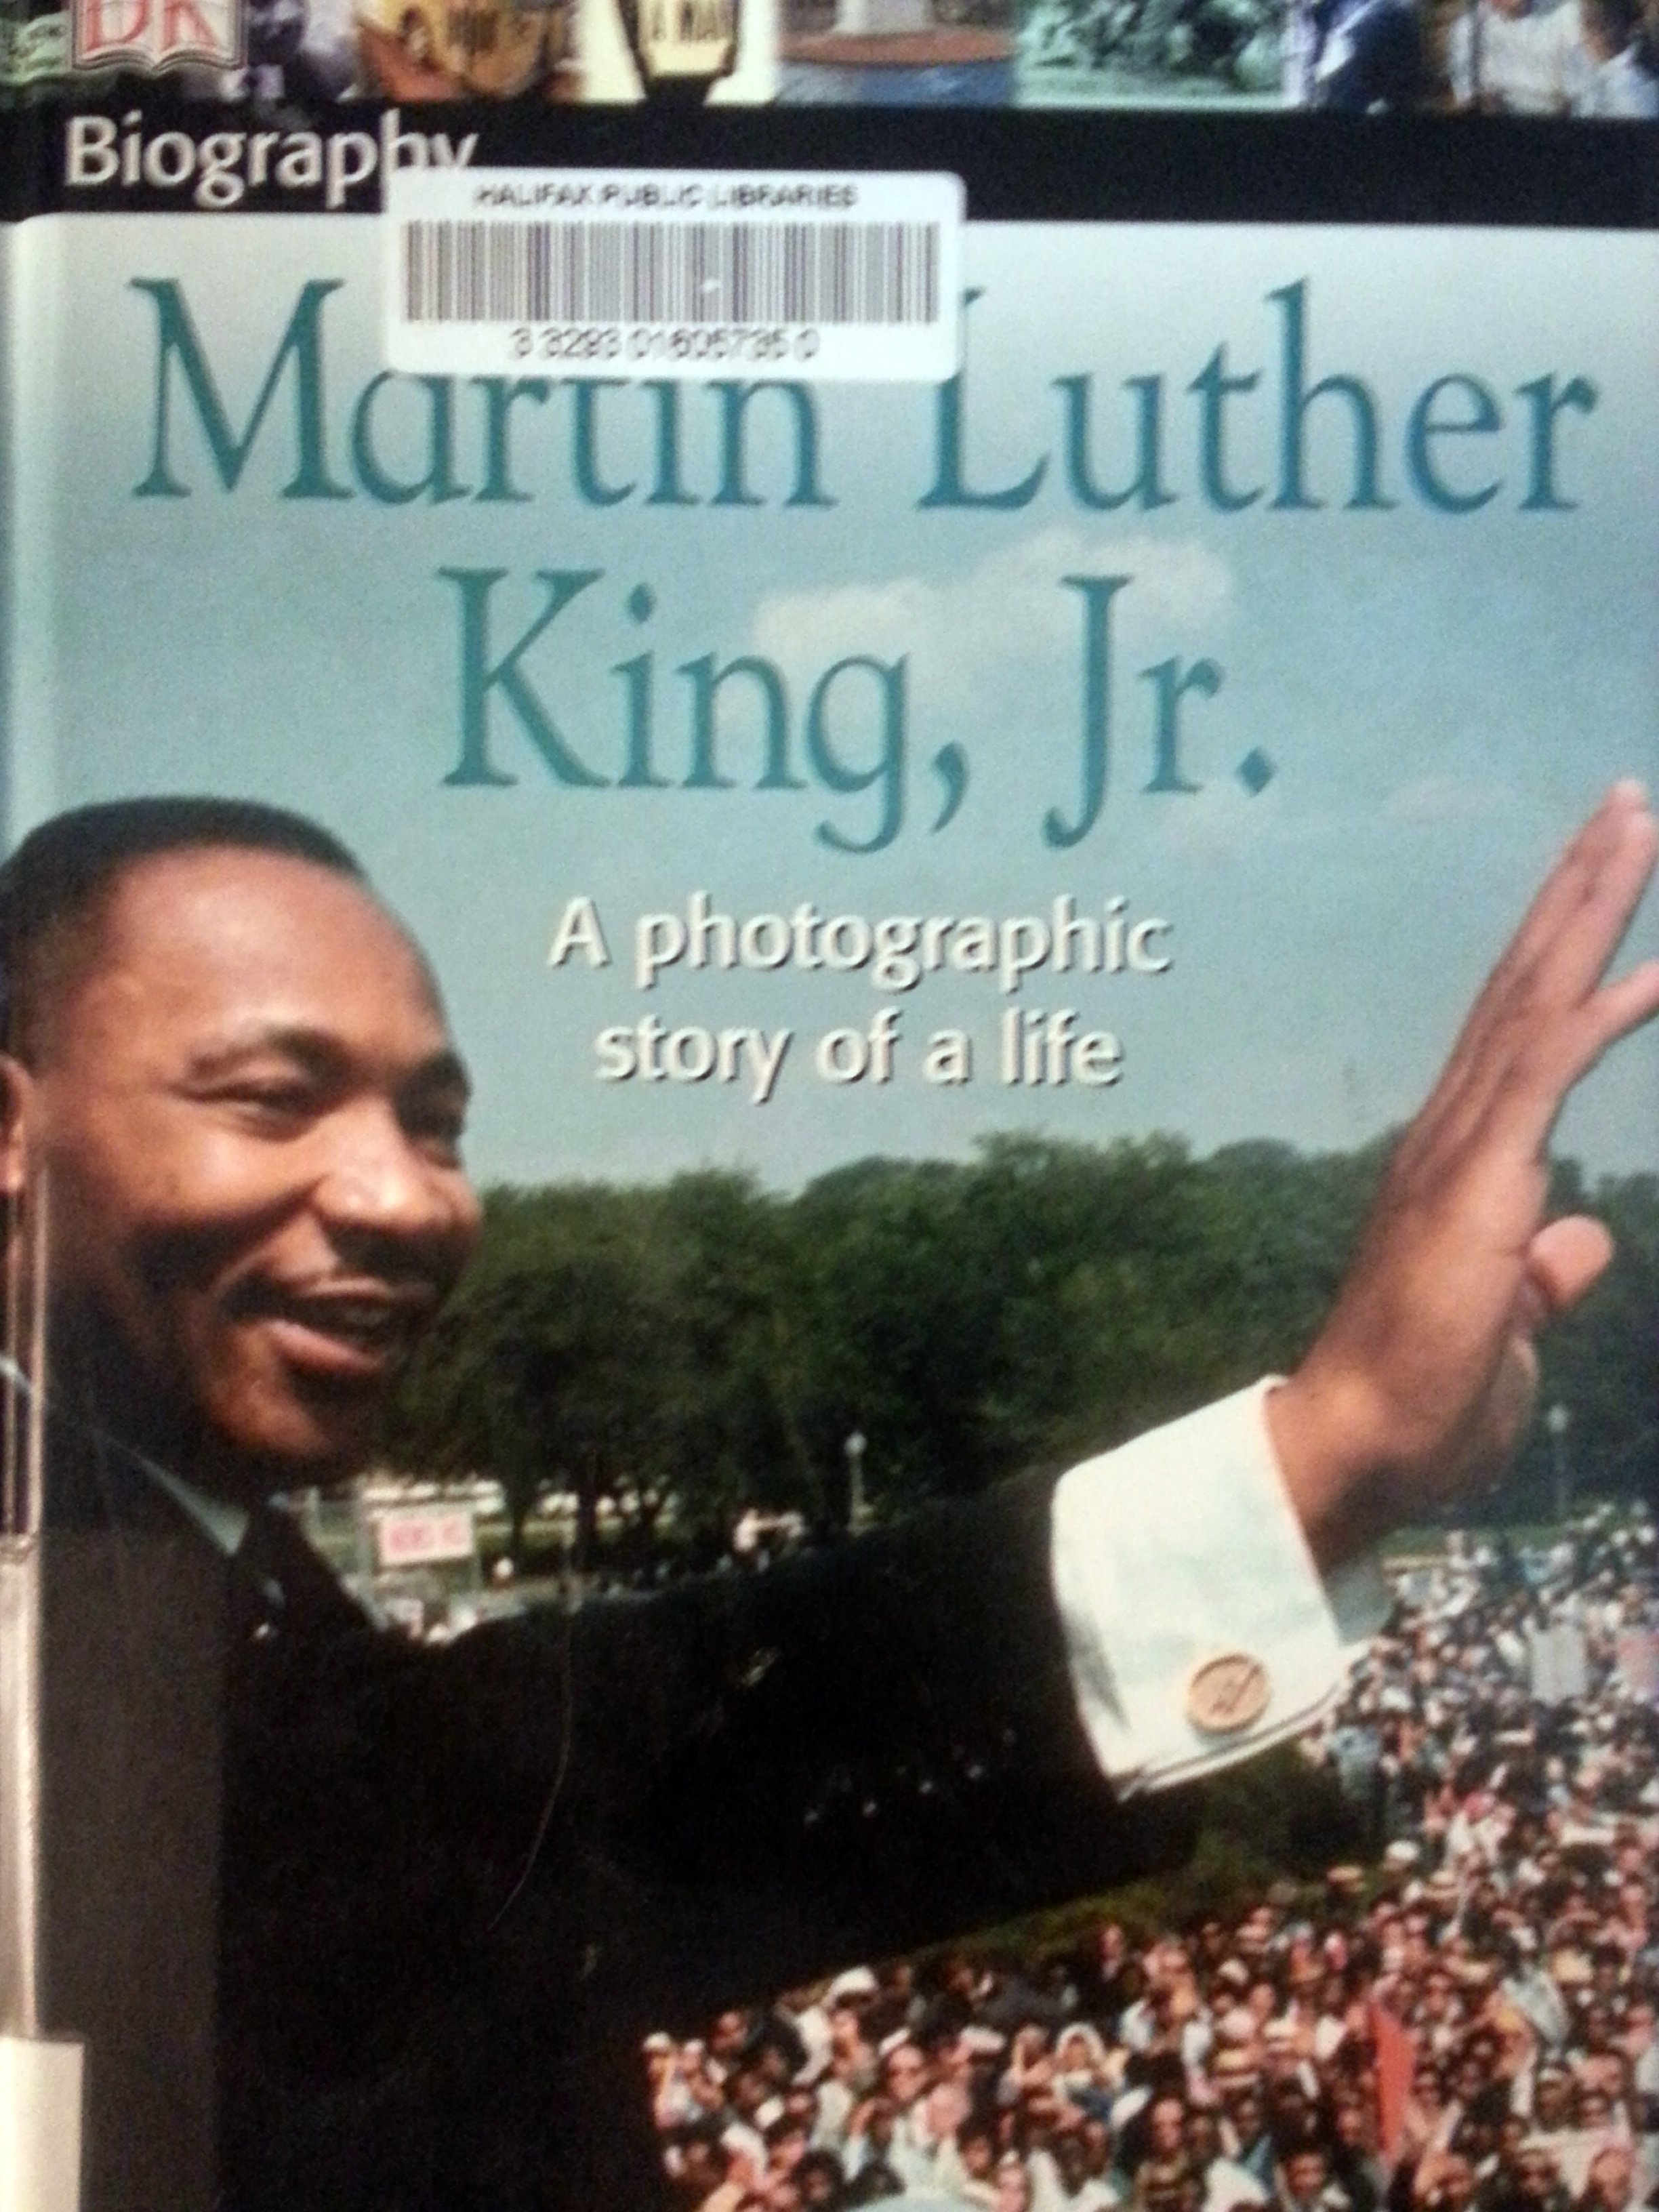 Martin Luther King, Jr. A photographic story of a life by Amy Pastan and Primo Levi ...2448 x 3264